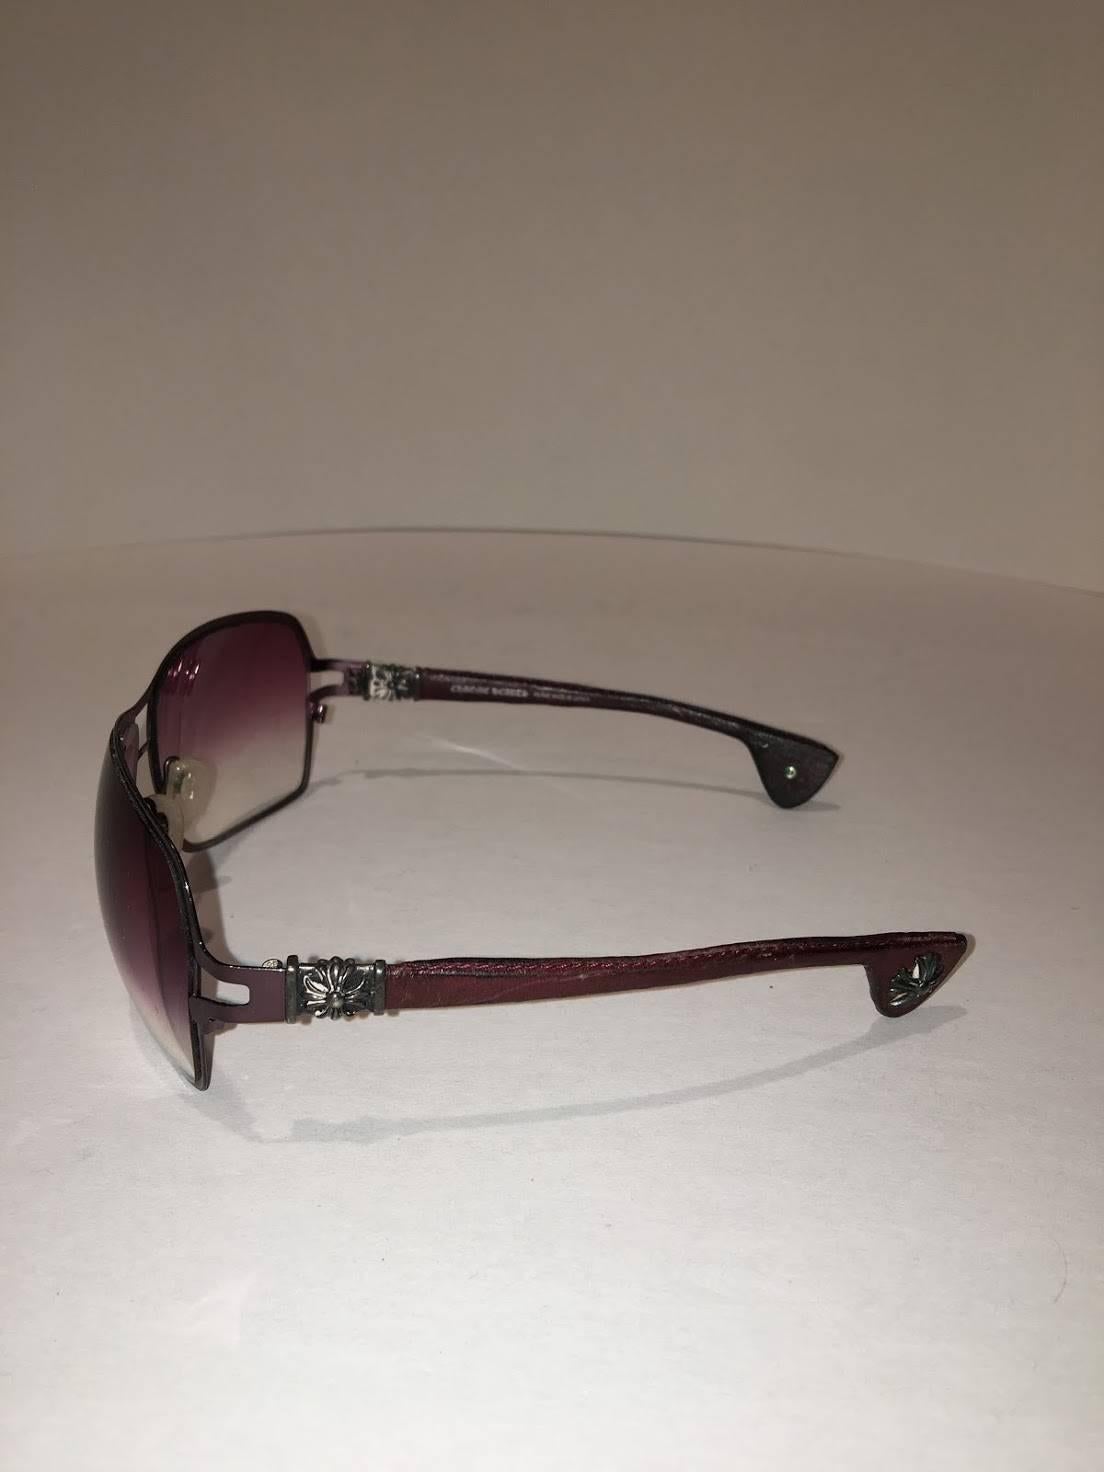 Chrome Hearts Stainless Steel Sunglasses in eggplant and leather. Hank Black Cherry polarized 62mm.